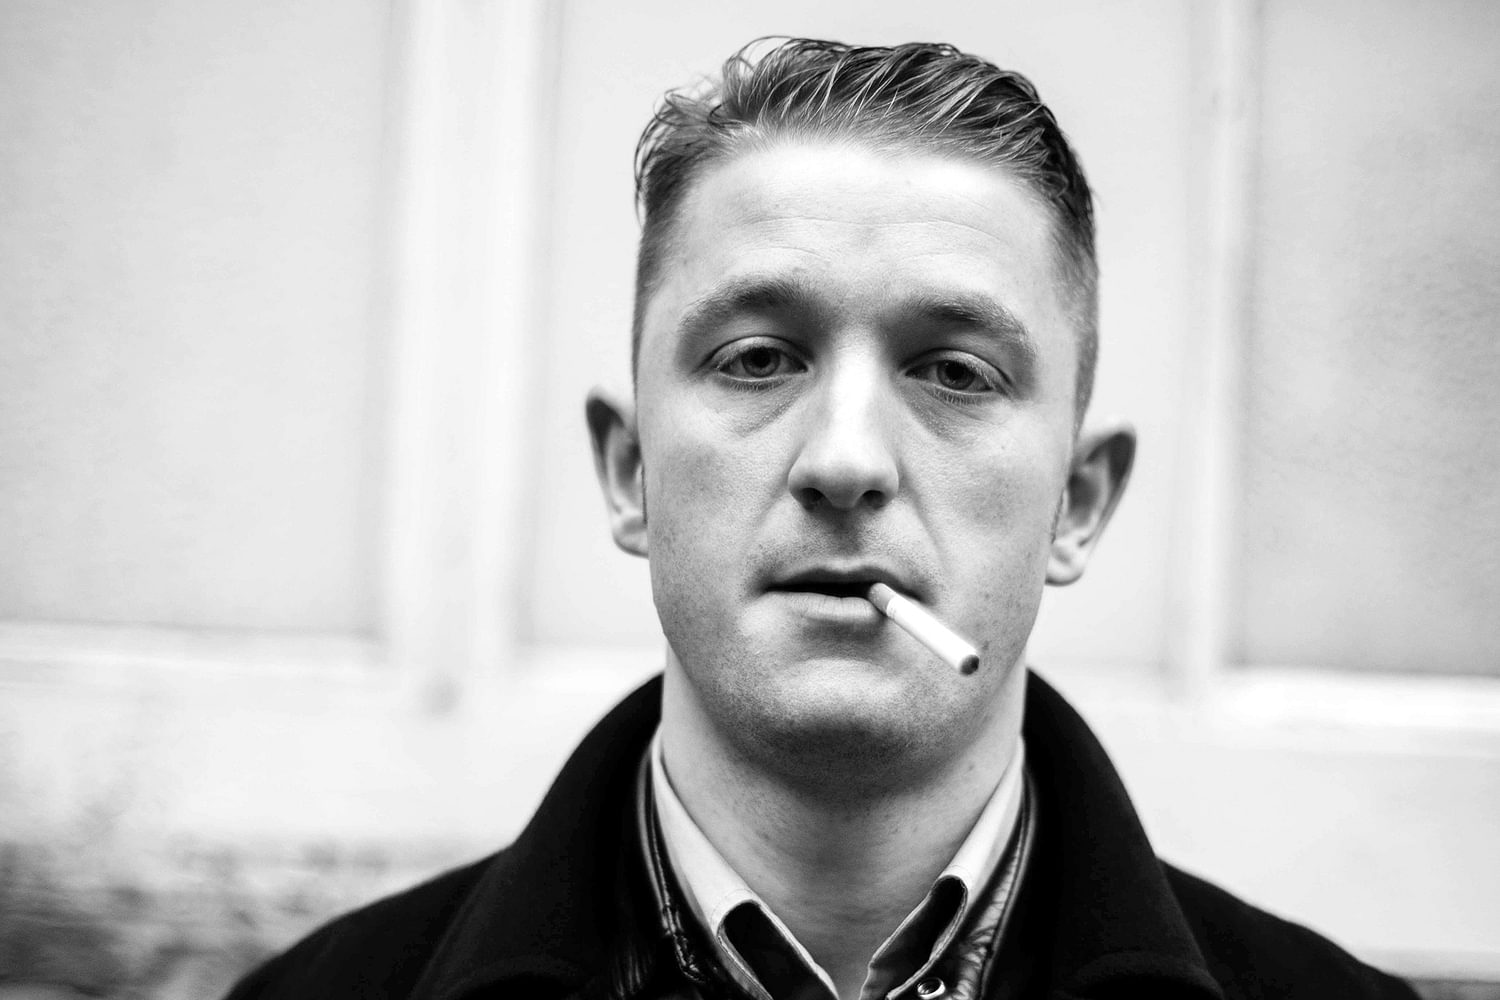 The Amazing Snakeheads announce October 2014 UK tour